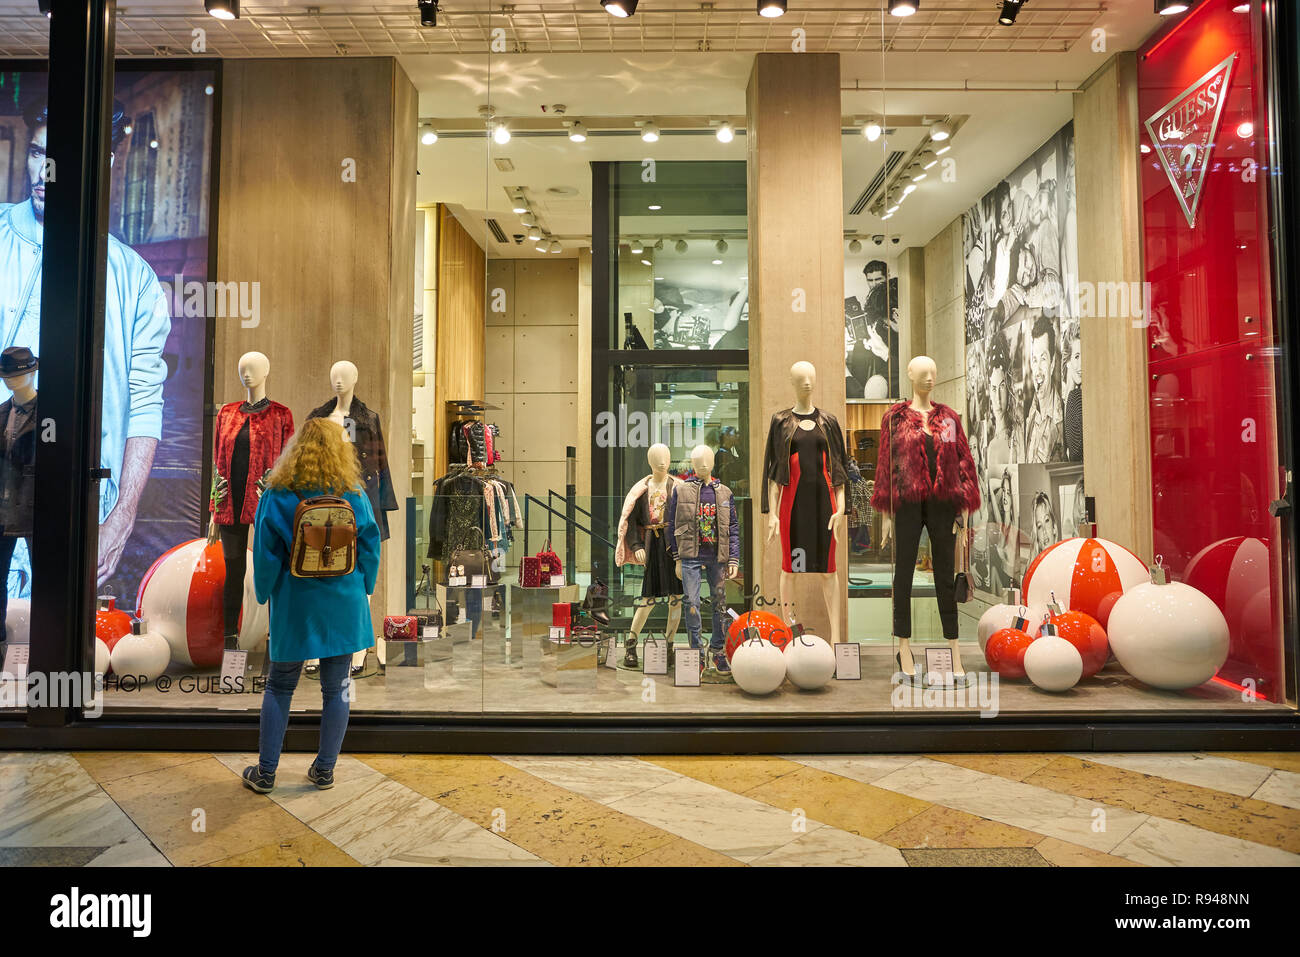 MILAN, ITALY - CIRCA NOVEMBER, 2017: window display at Guess store in Milan.  Guess is an American clothing brand and retailer Stock Photo - Alamy